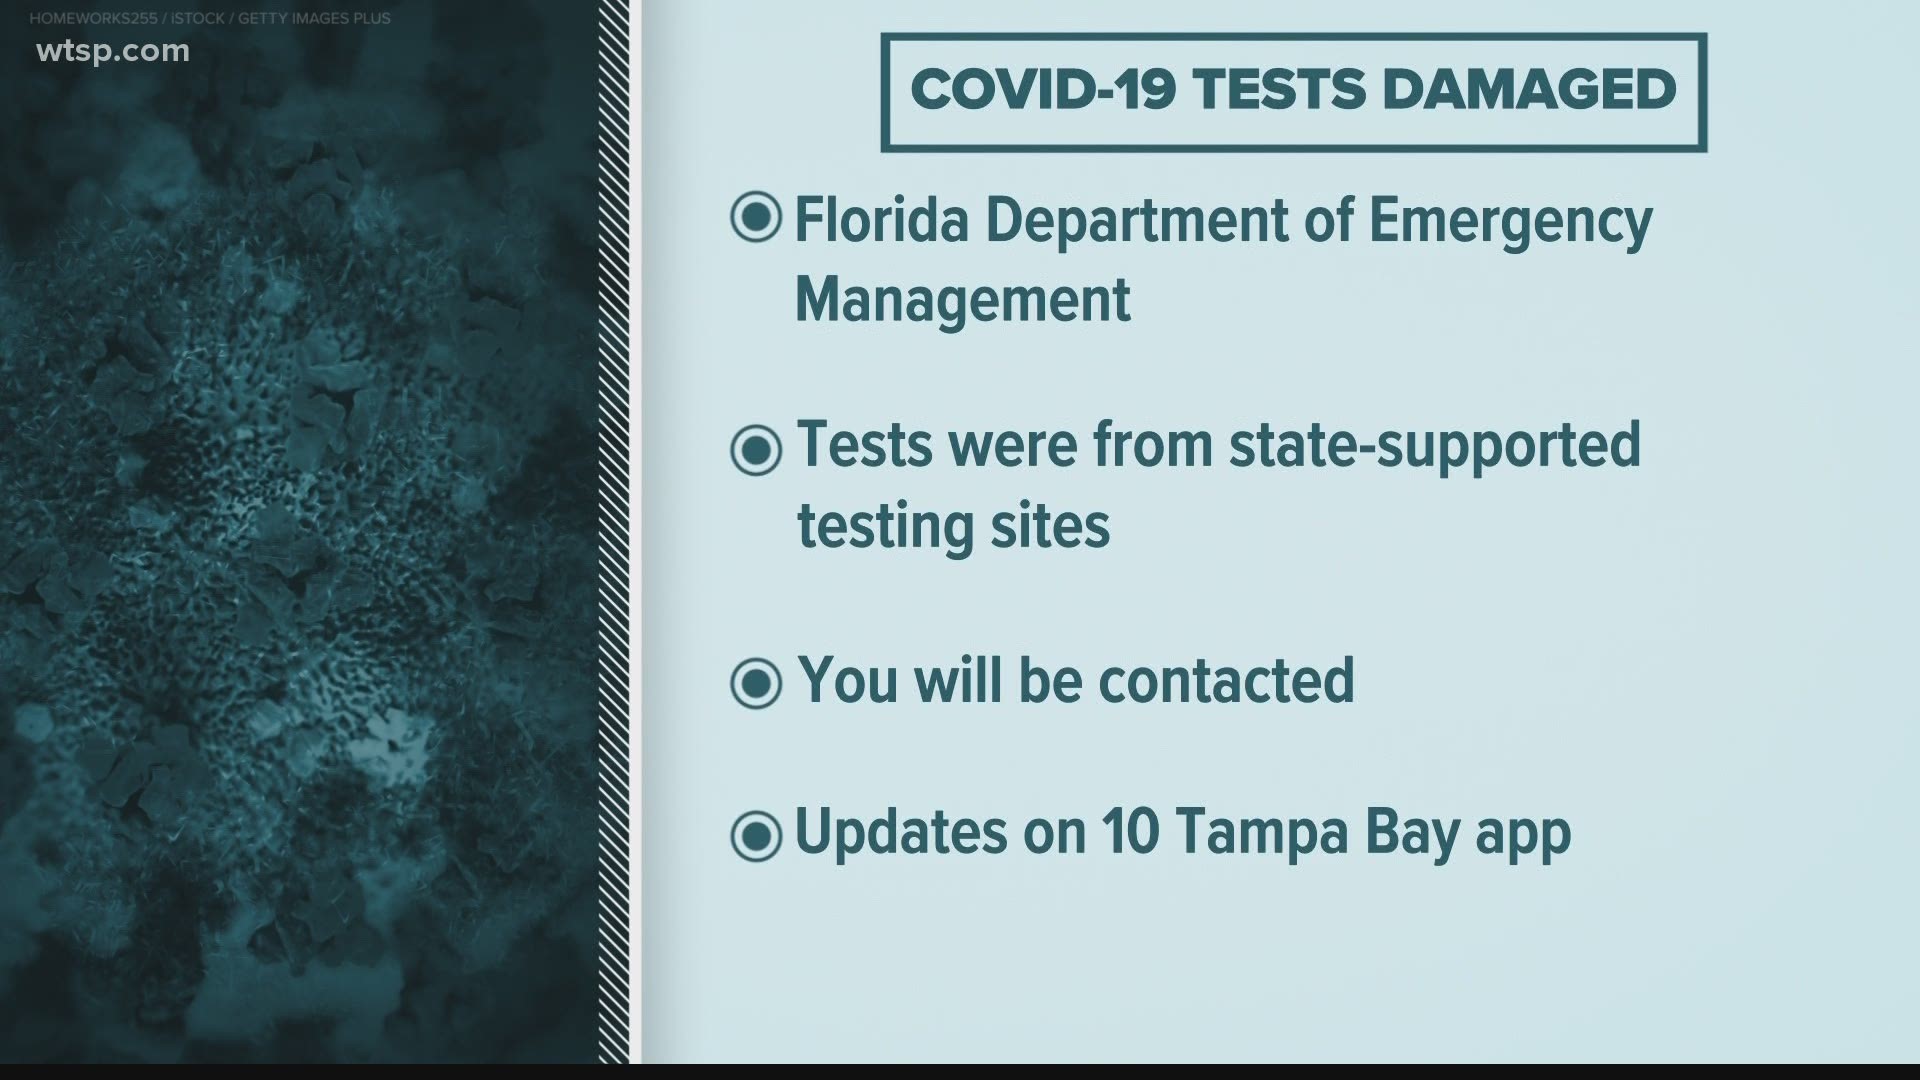 10 Tampa Bay is working to find out if any of these damaged tests were from the Tampa Bay area.